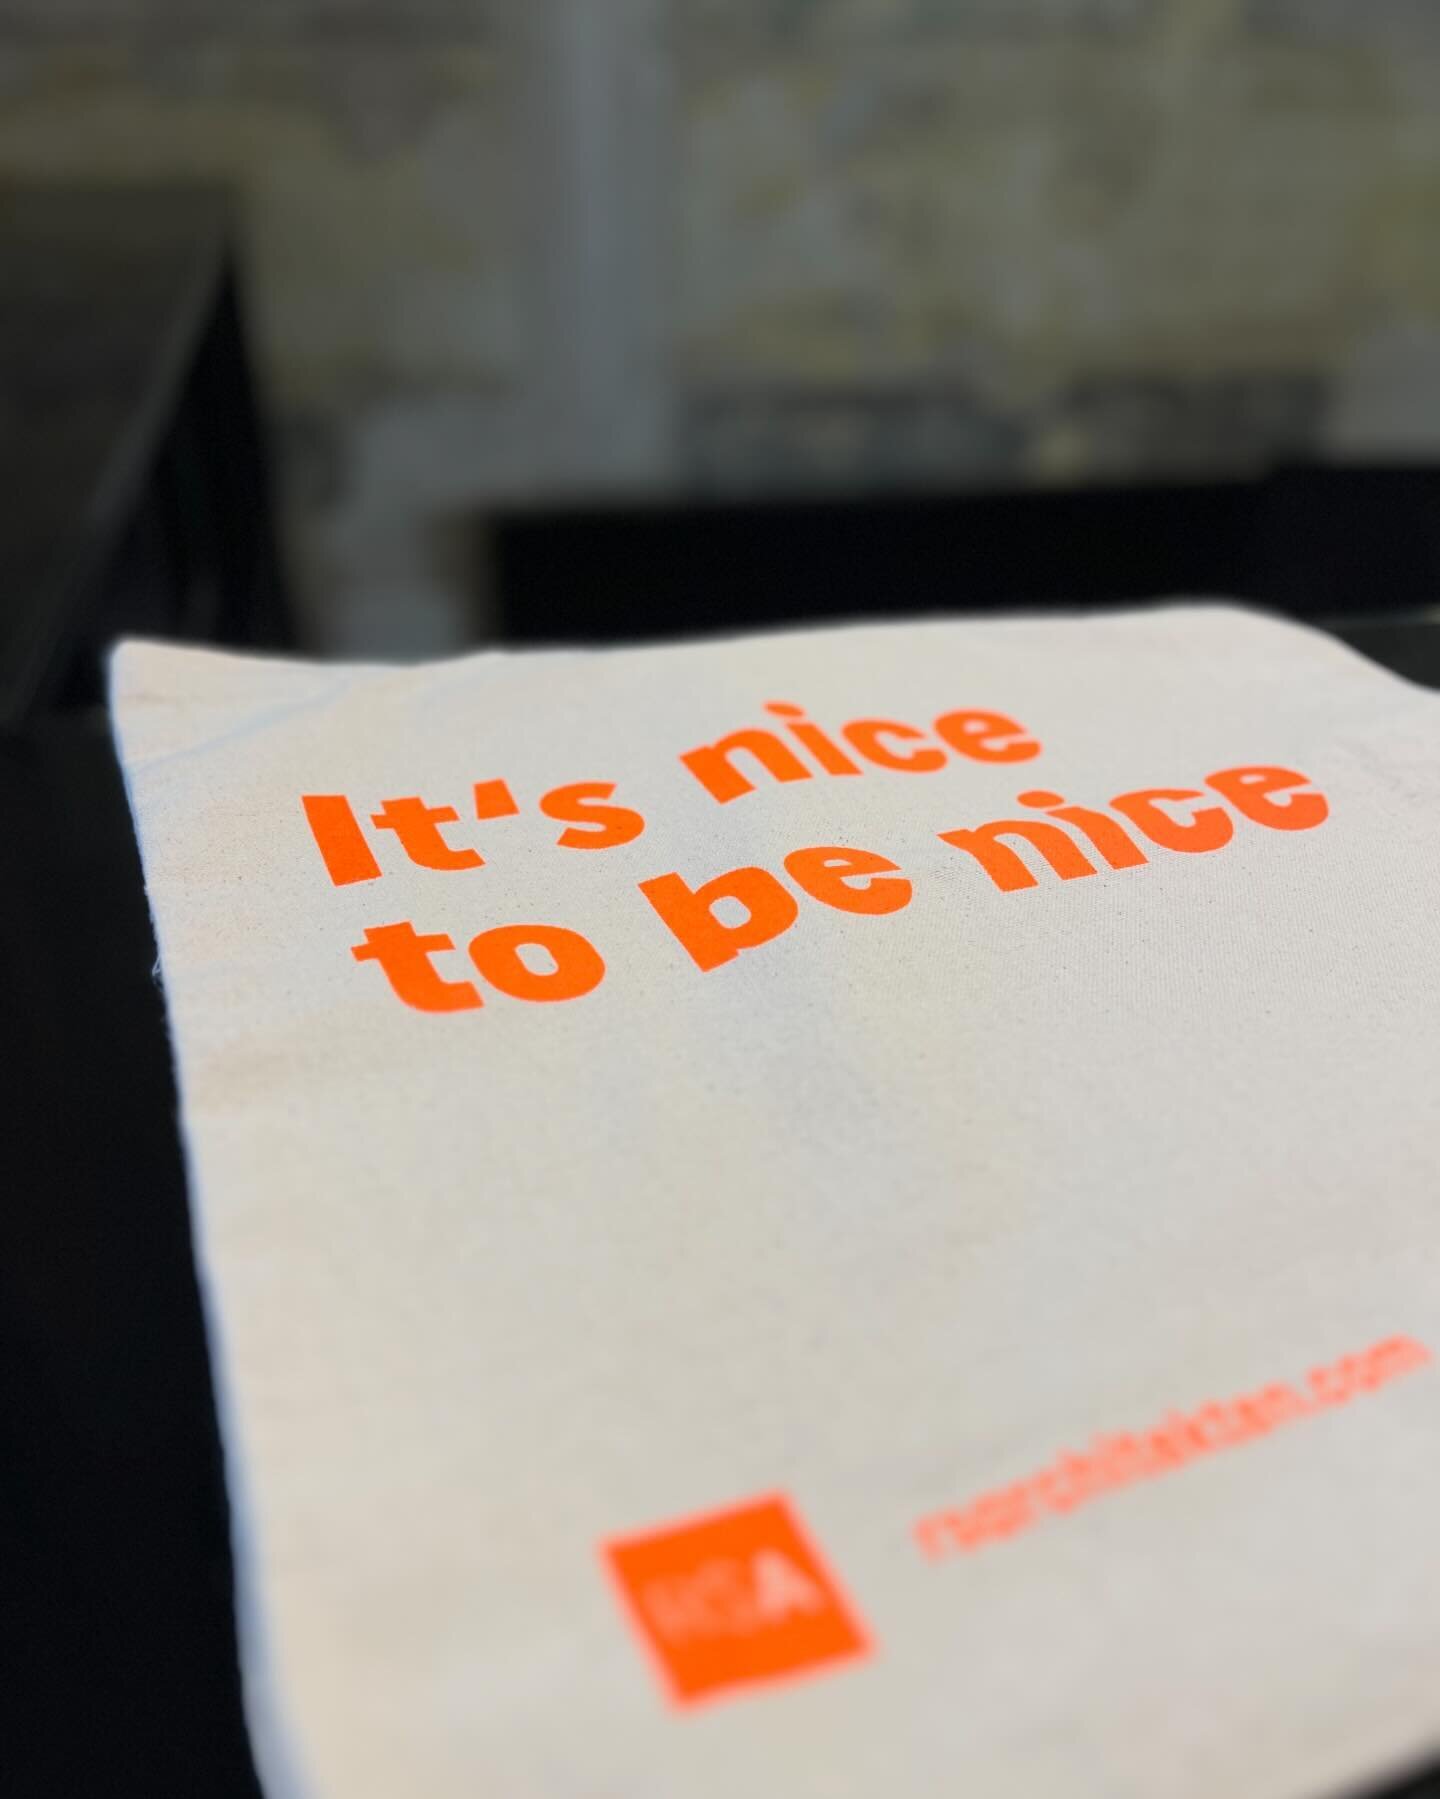 IT&lsquo;S NICE TO BE NICE 

RSA &hellip; UNSERE AKTUELLE TASCHE

NACHHALTIG // NACHHALTIG // NACHHALTIG 🫵